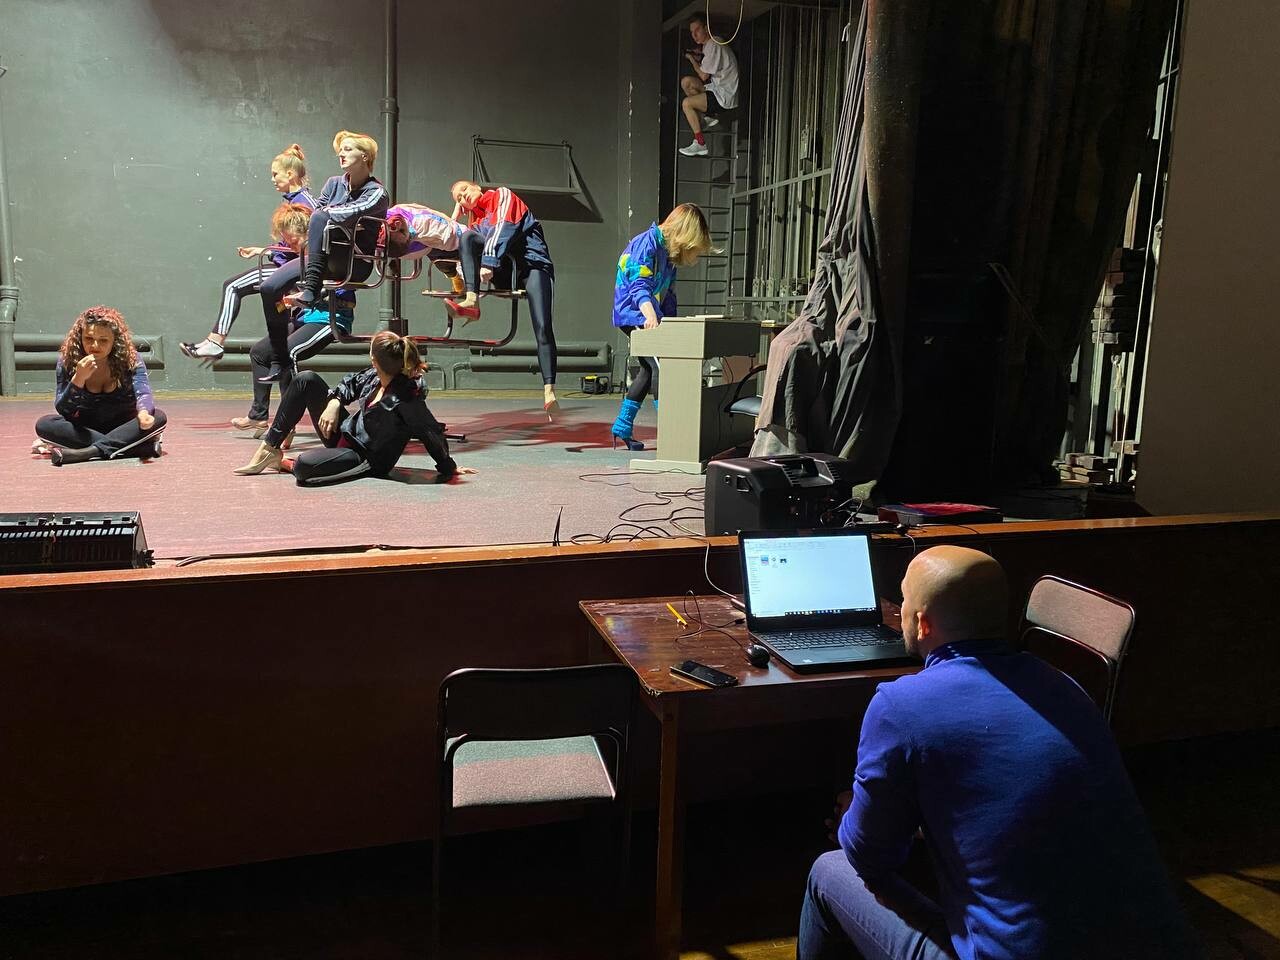 A person sits in front of a laptop watching actors rehearse on stage.